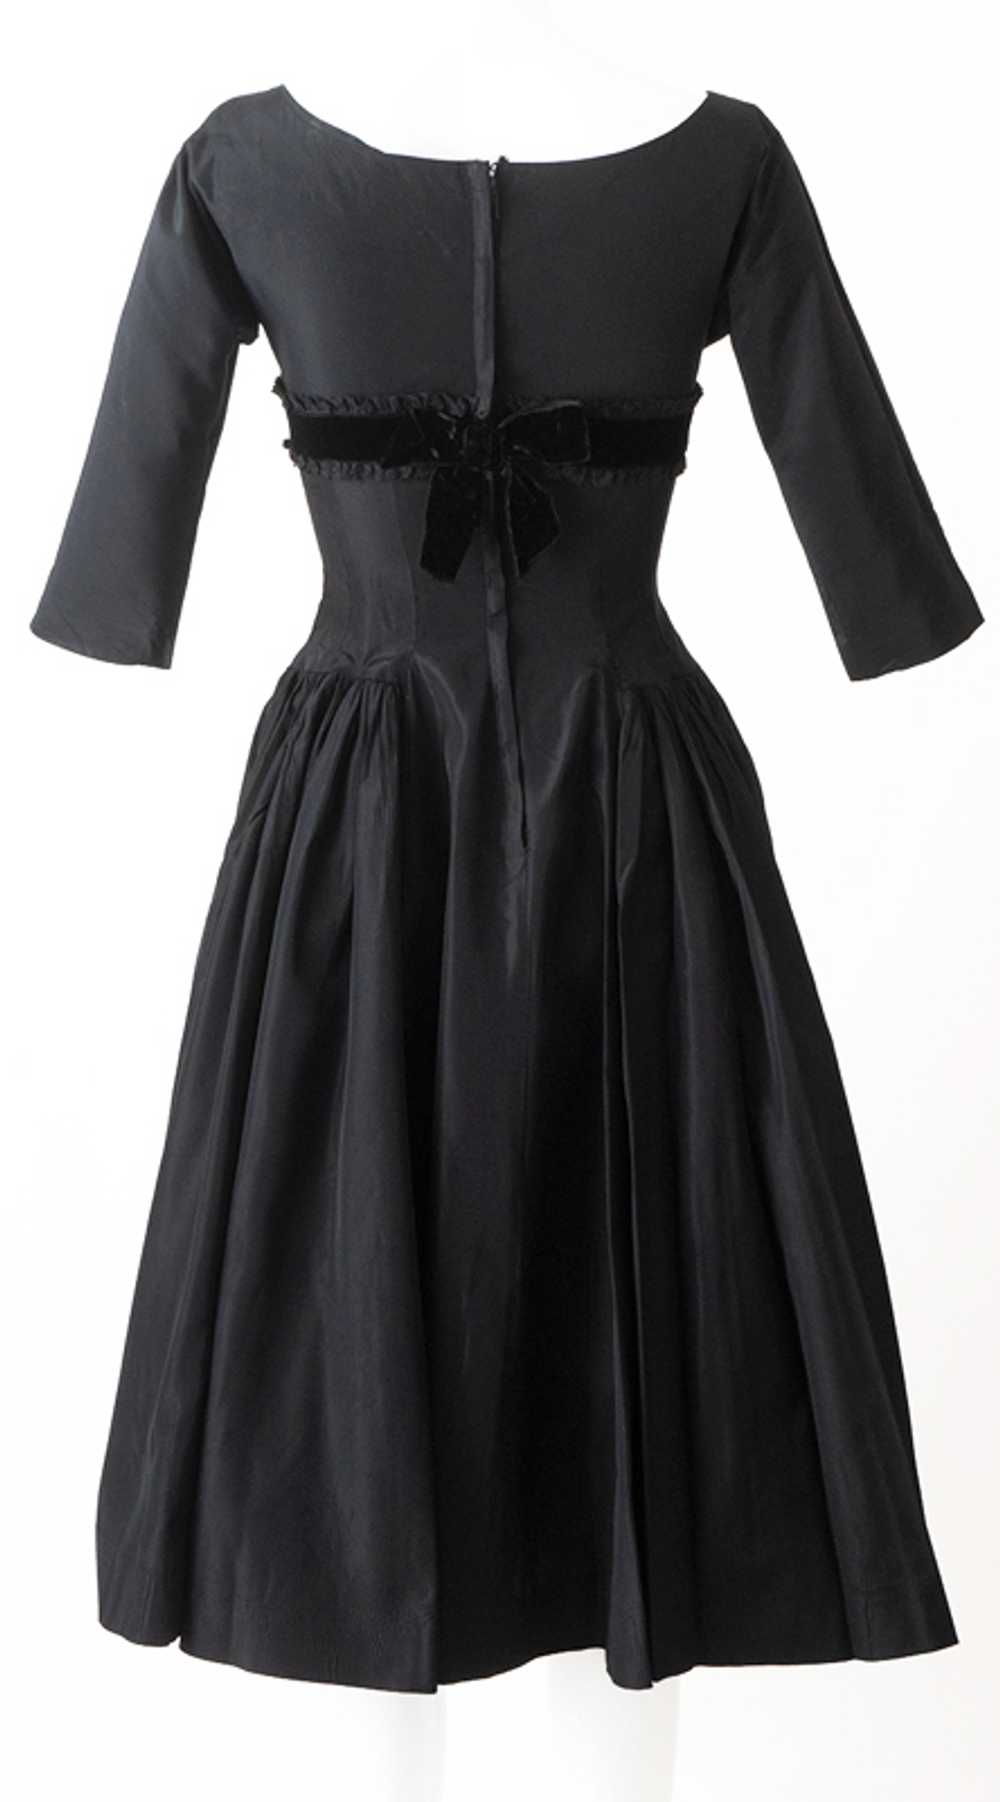 1950s Fit and Flare Party Dress - image 4